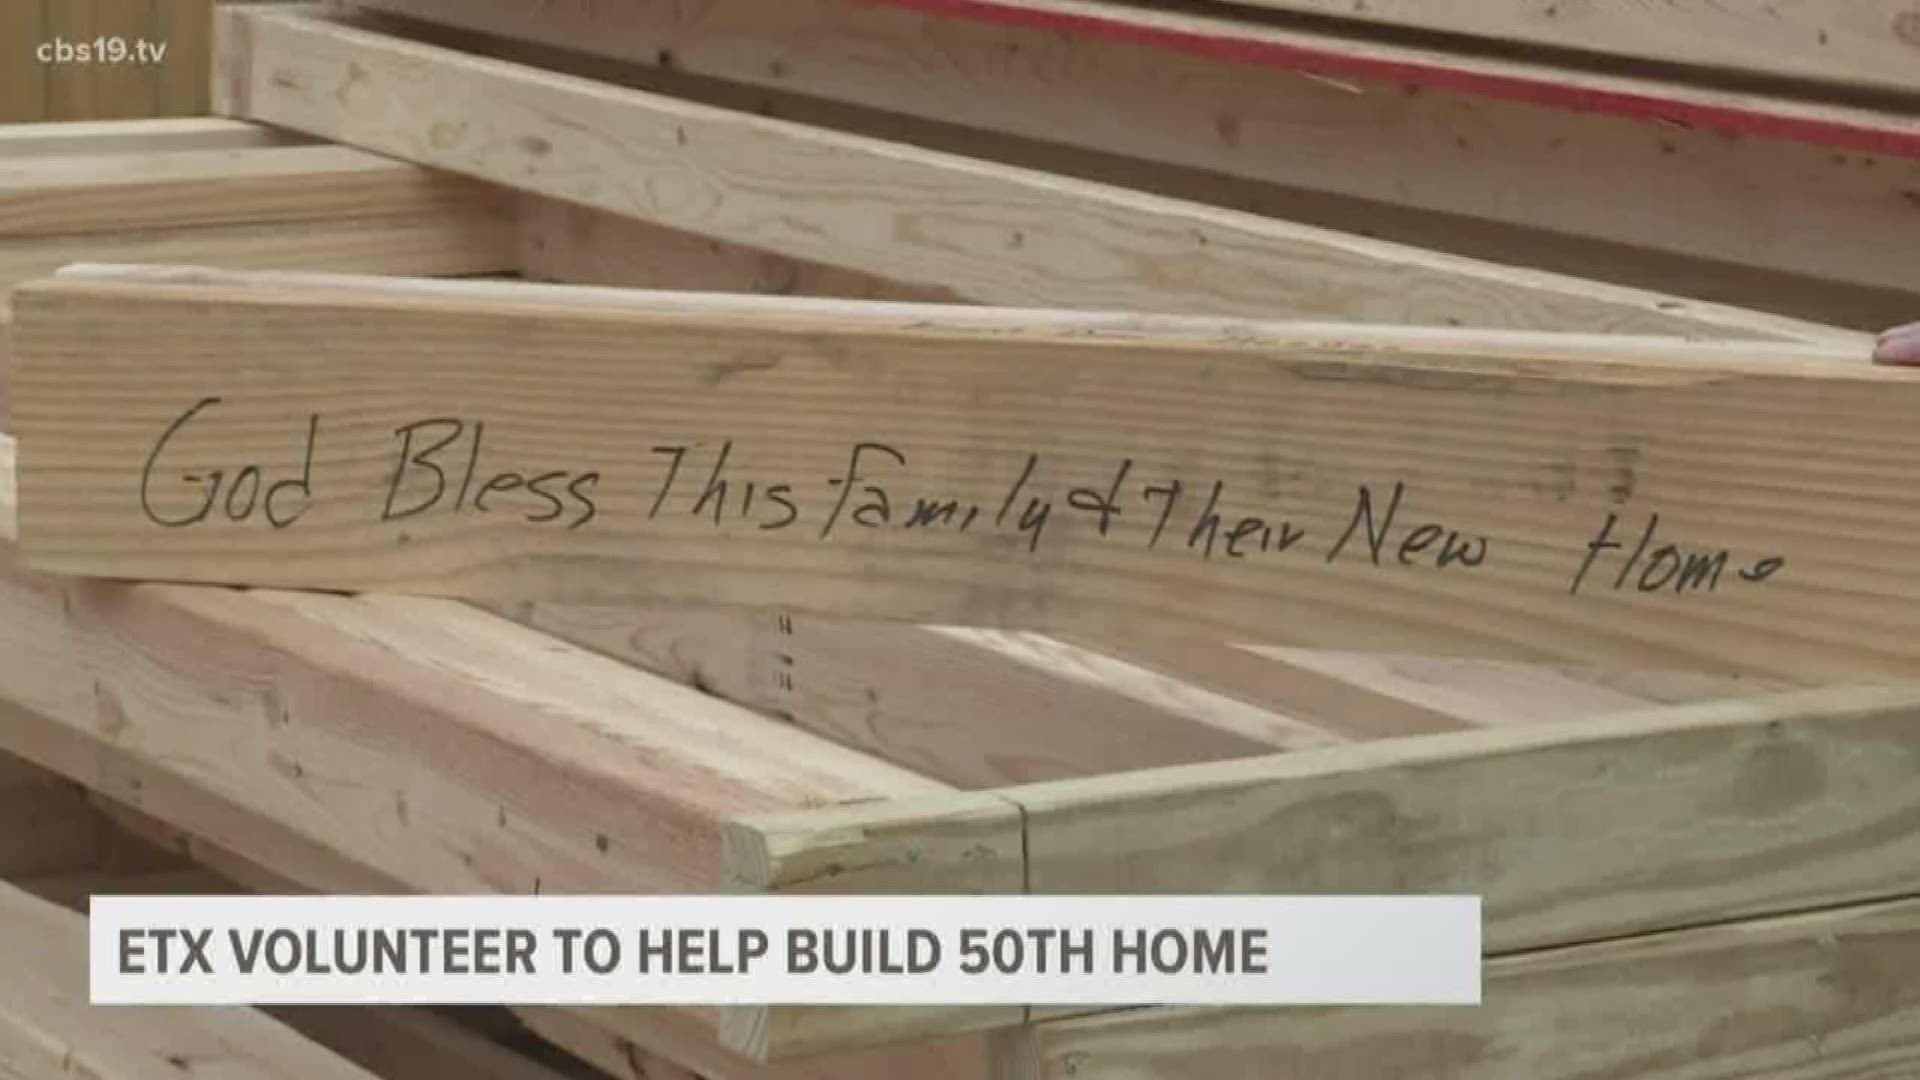 Bob Beckley has been a volunteer for Habitat of Humanity of Smith County since 2004 and after he helps build his 50th home, he’ll be putting down the tools.